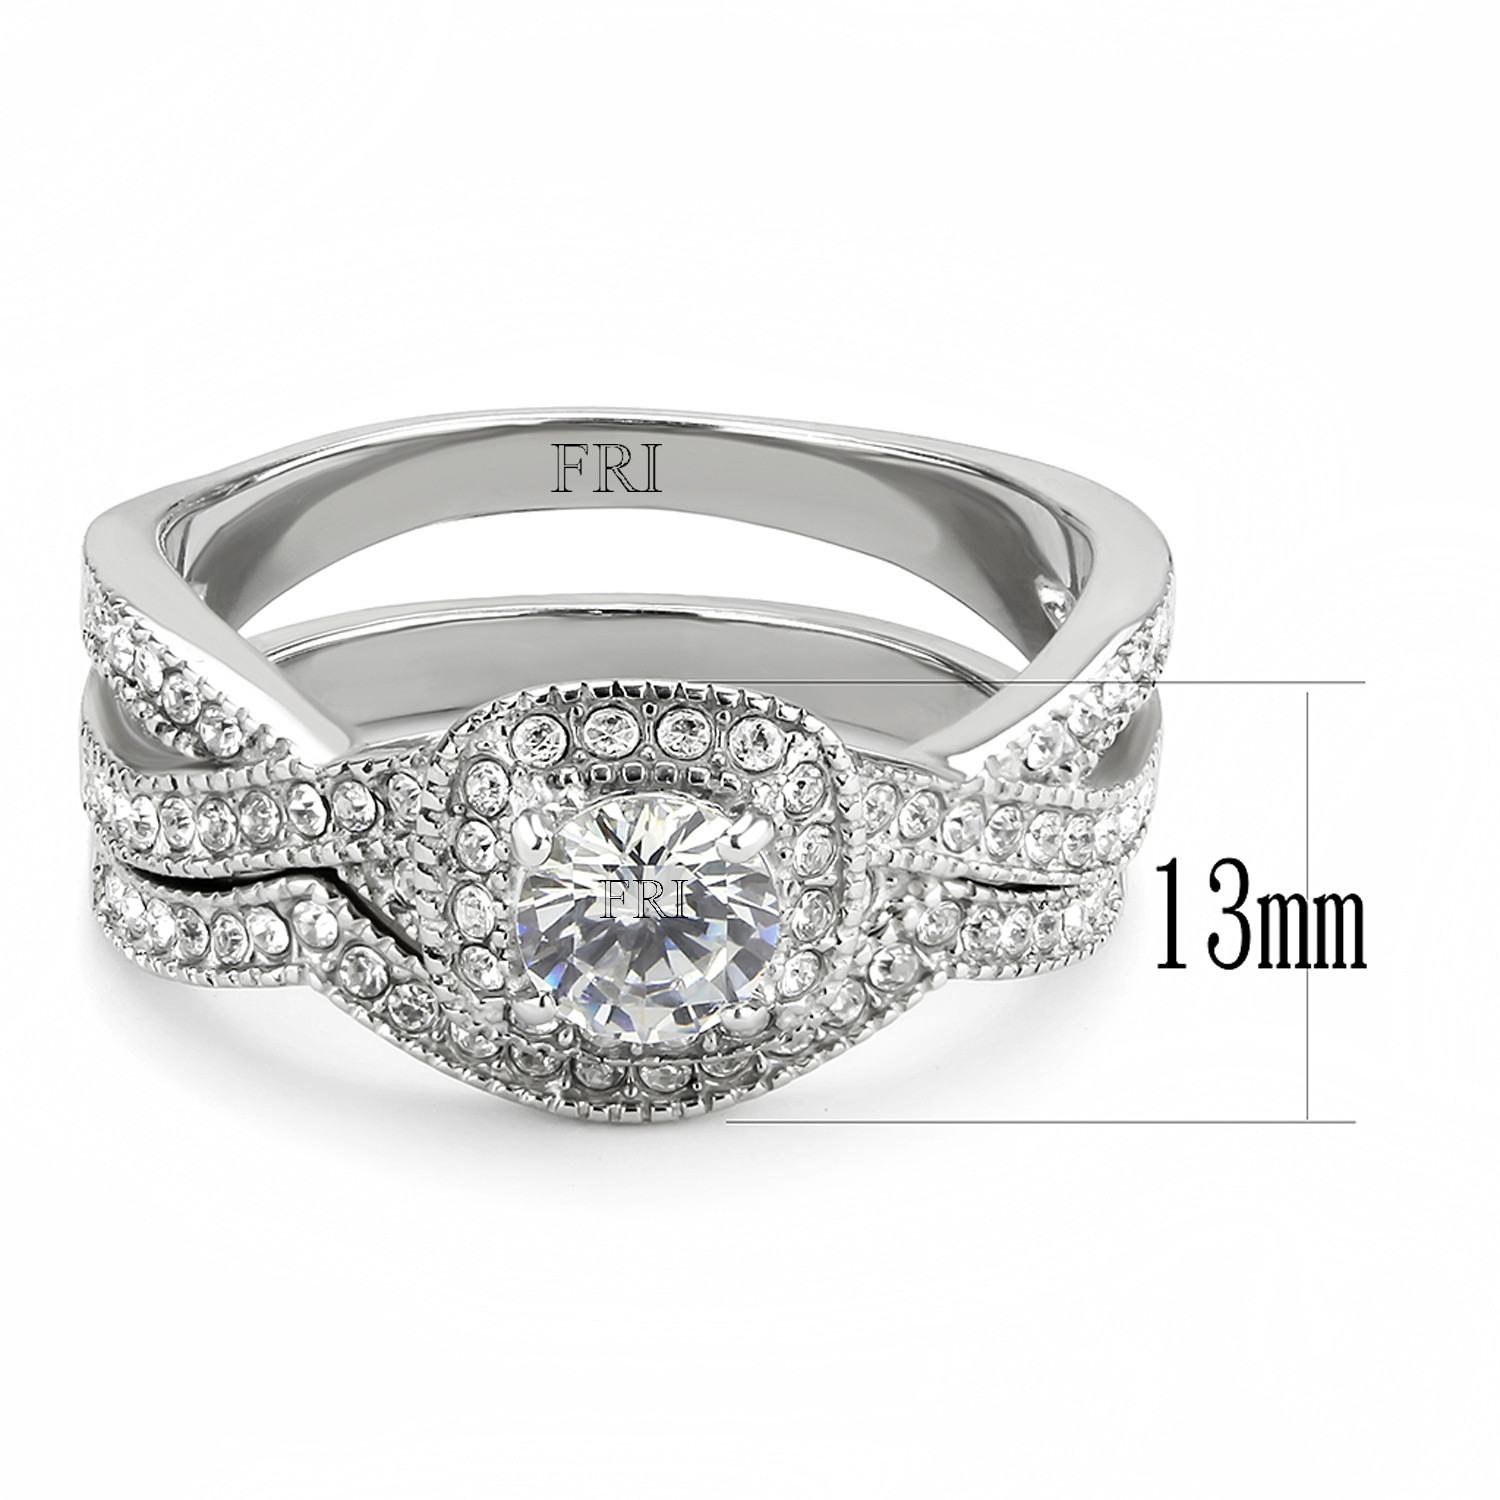 Stainless Steel Cubic Zirconia Wedding Ring Sets
 Stainless Steel Women s Infinity Wedding Ring Set Halo